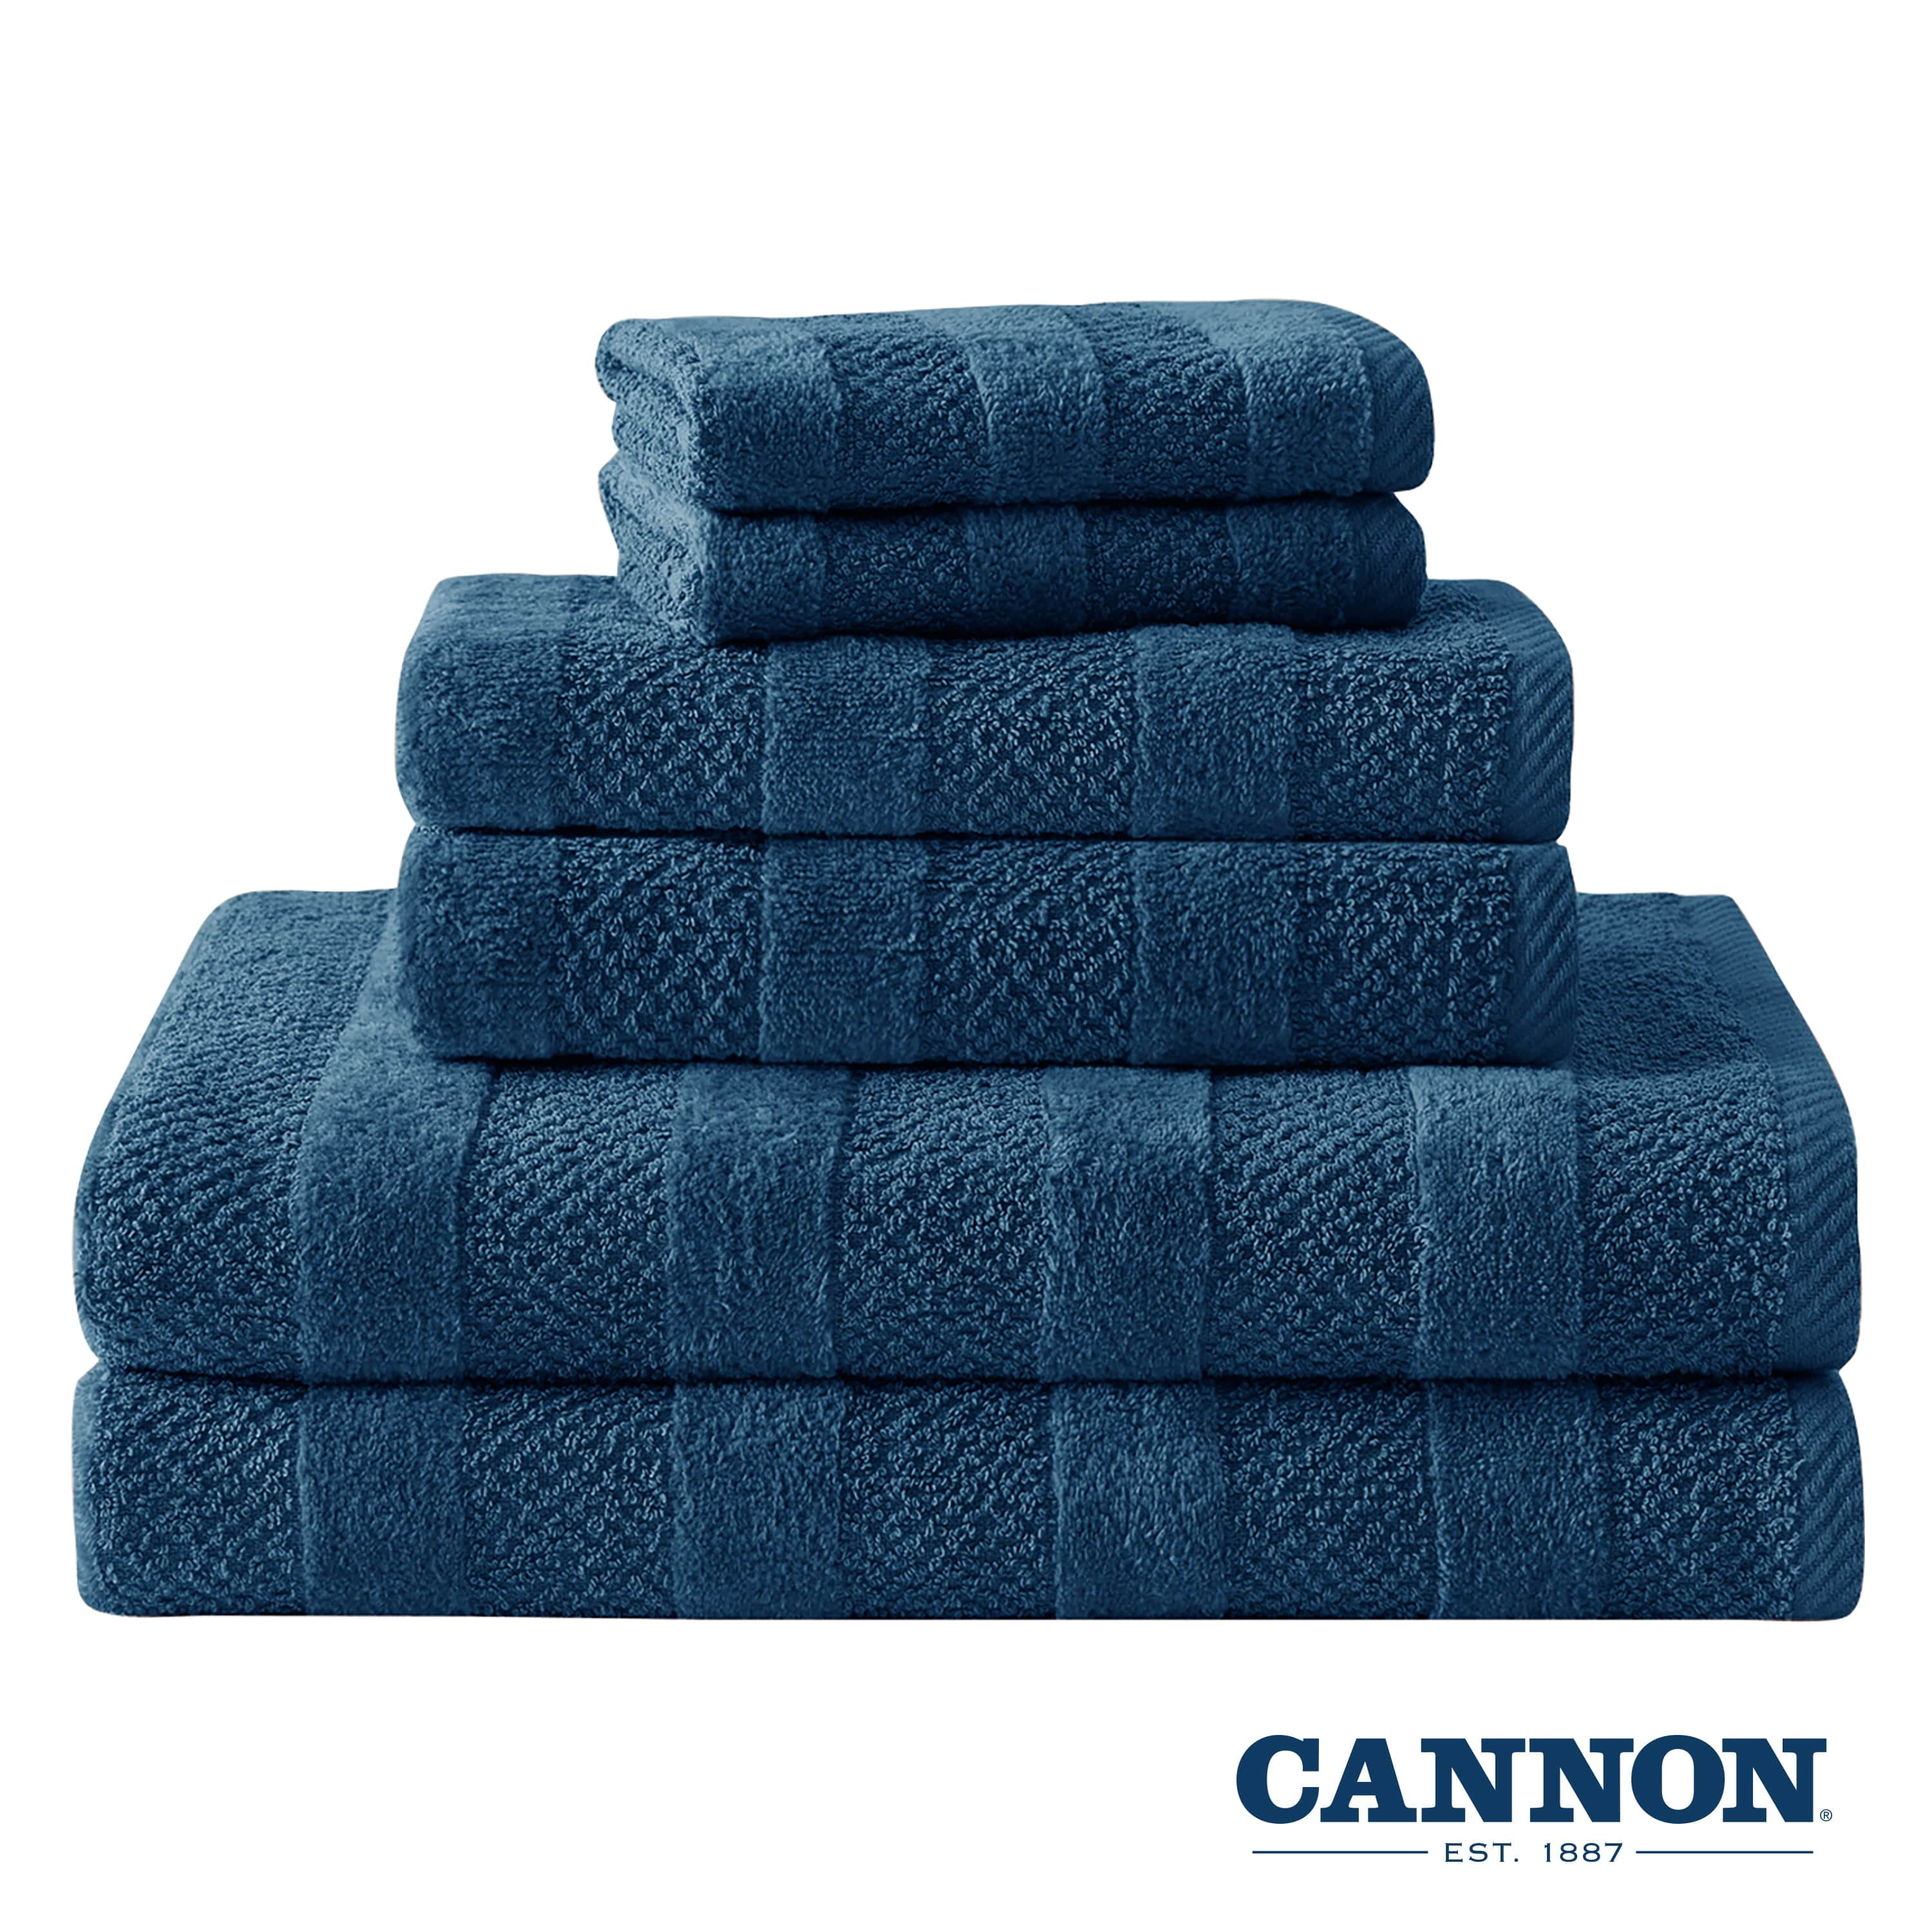 Cannon Low Twist 100 % Cotton 6-Piece Towel Set, 550 gsm, Highly Absorbent, Super Soft and Fluffy, 6-Piece Set, Jade Green